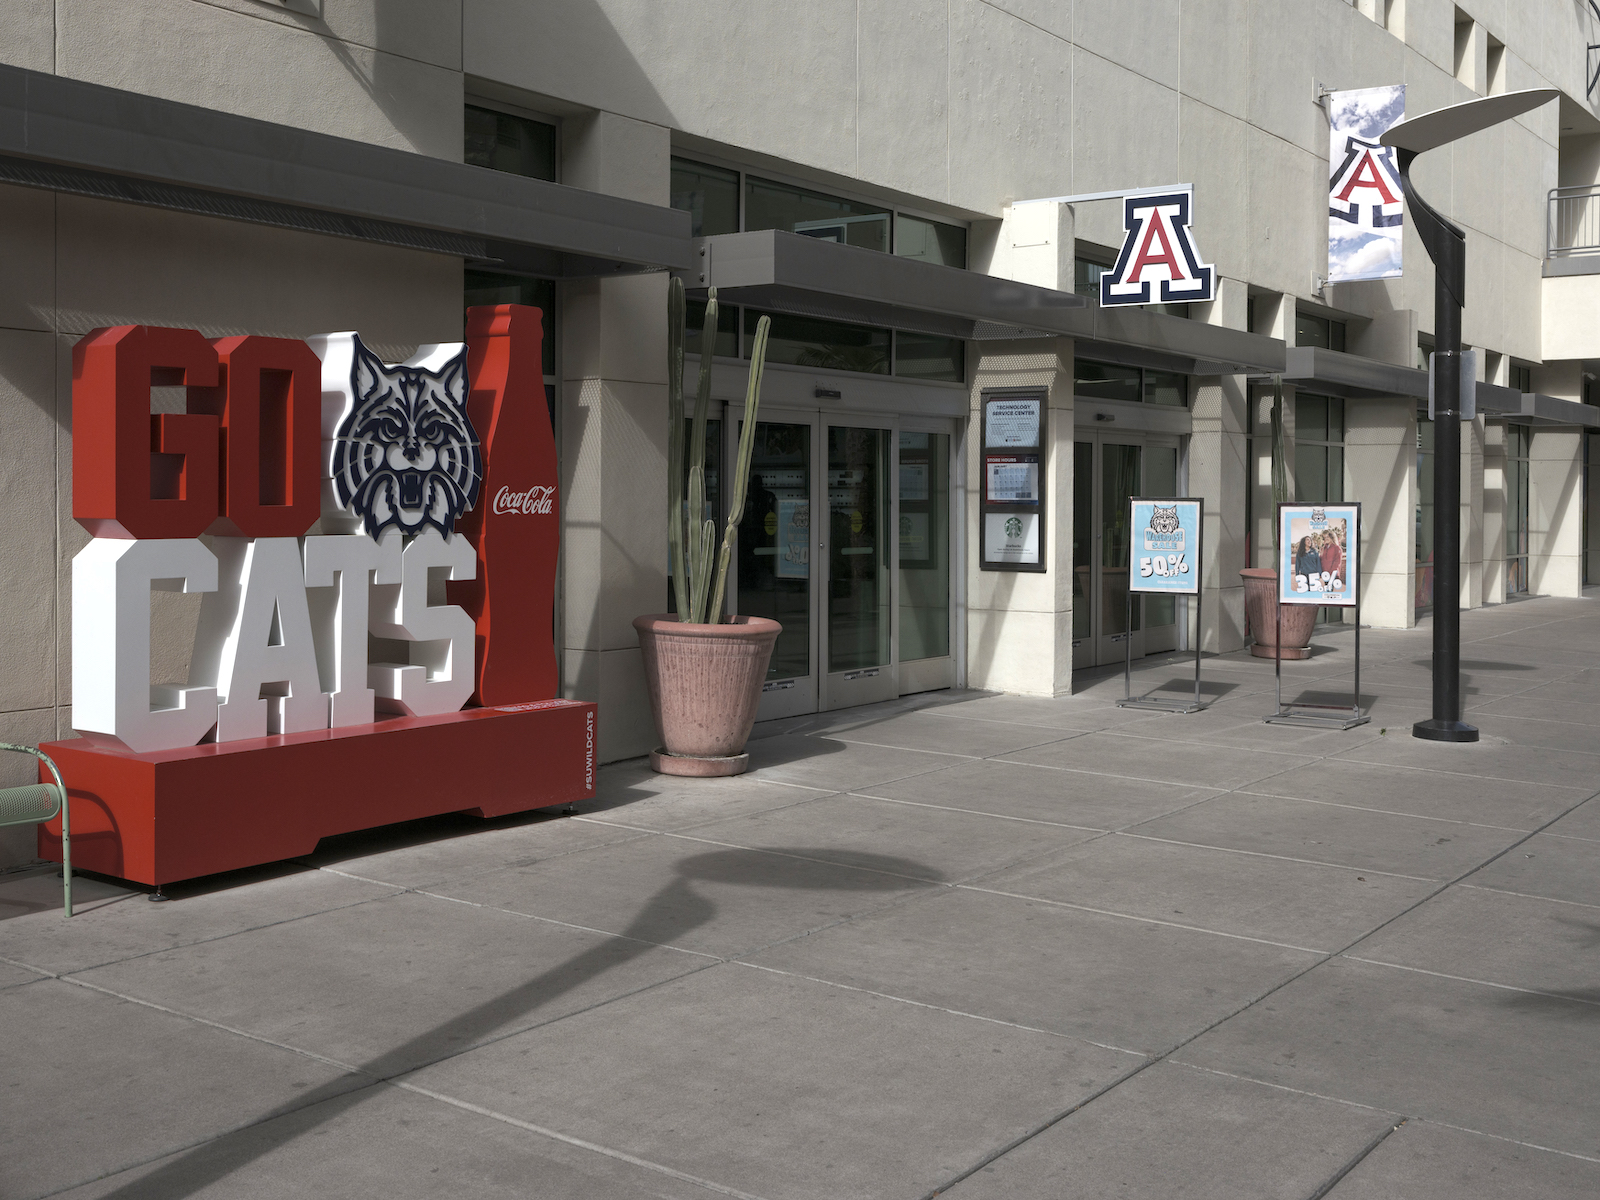 a red Arizona Wildcats mascot structure near a building entrance with University 